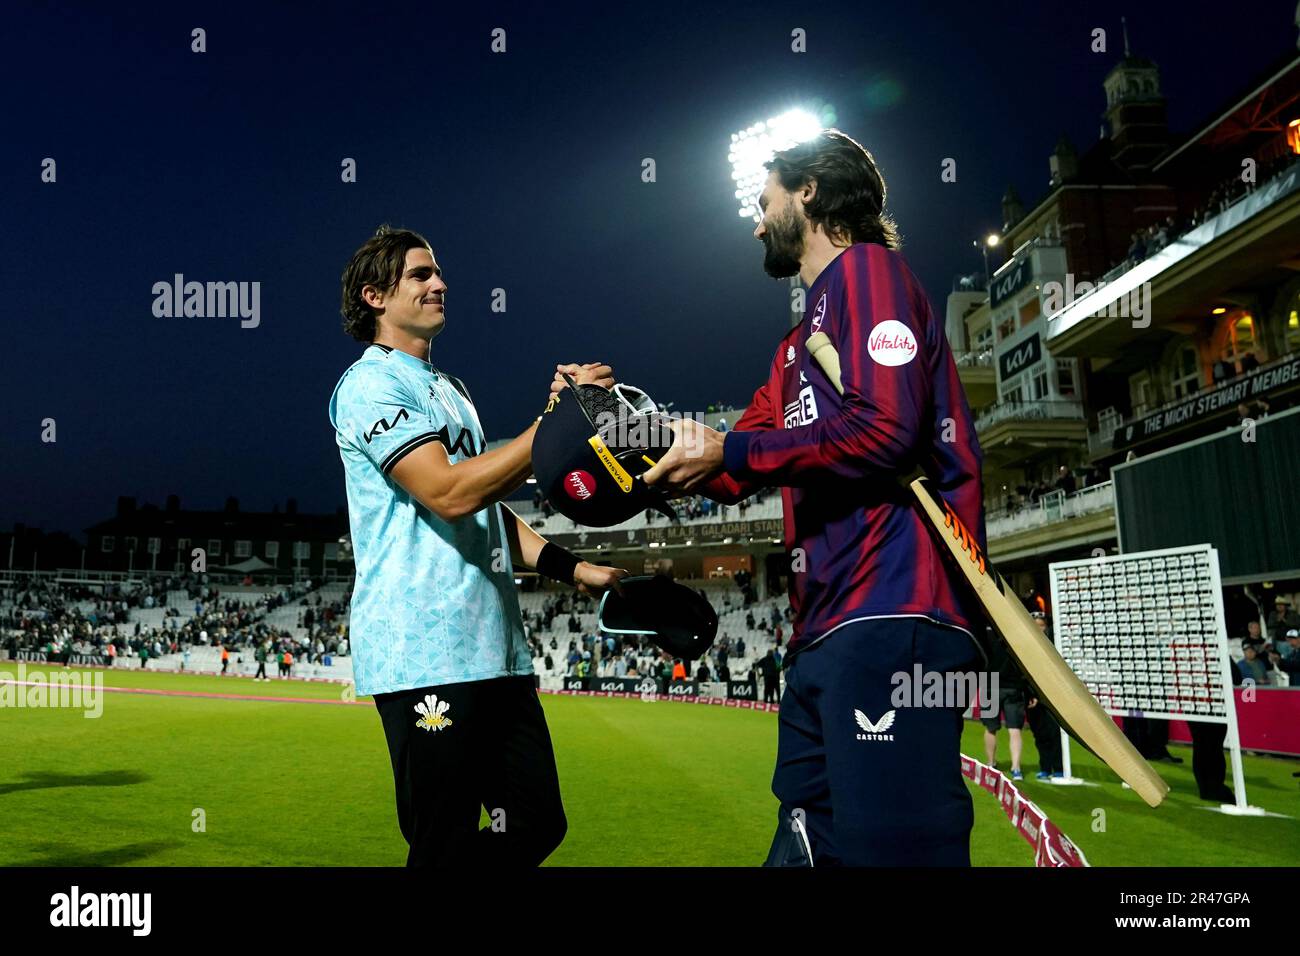 Surrey’s Sean Abbott (left) is congratulated on their victory at the end of the match by Kent Spitfire’s Kane Richardson (right) during the Vitality Blast T20 match at the Kia Oval, London Picture date: Friday May 26, 2022. Stock Photo